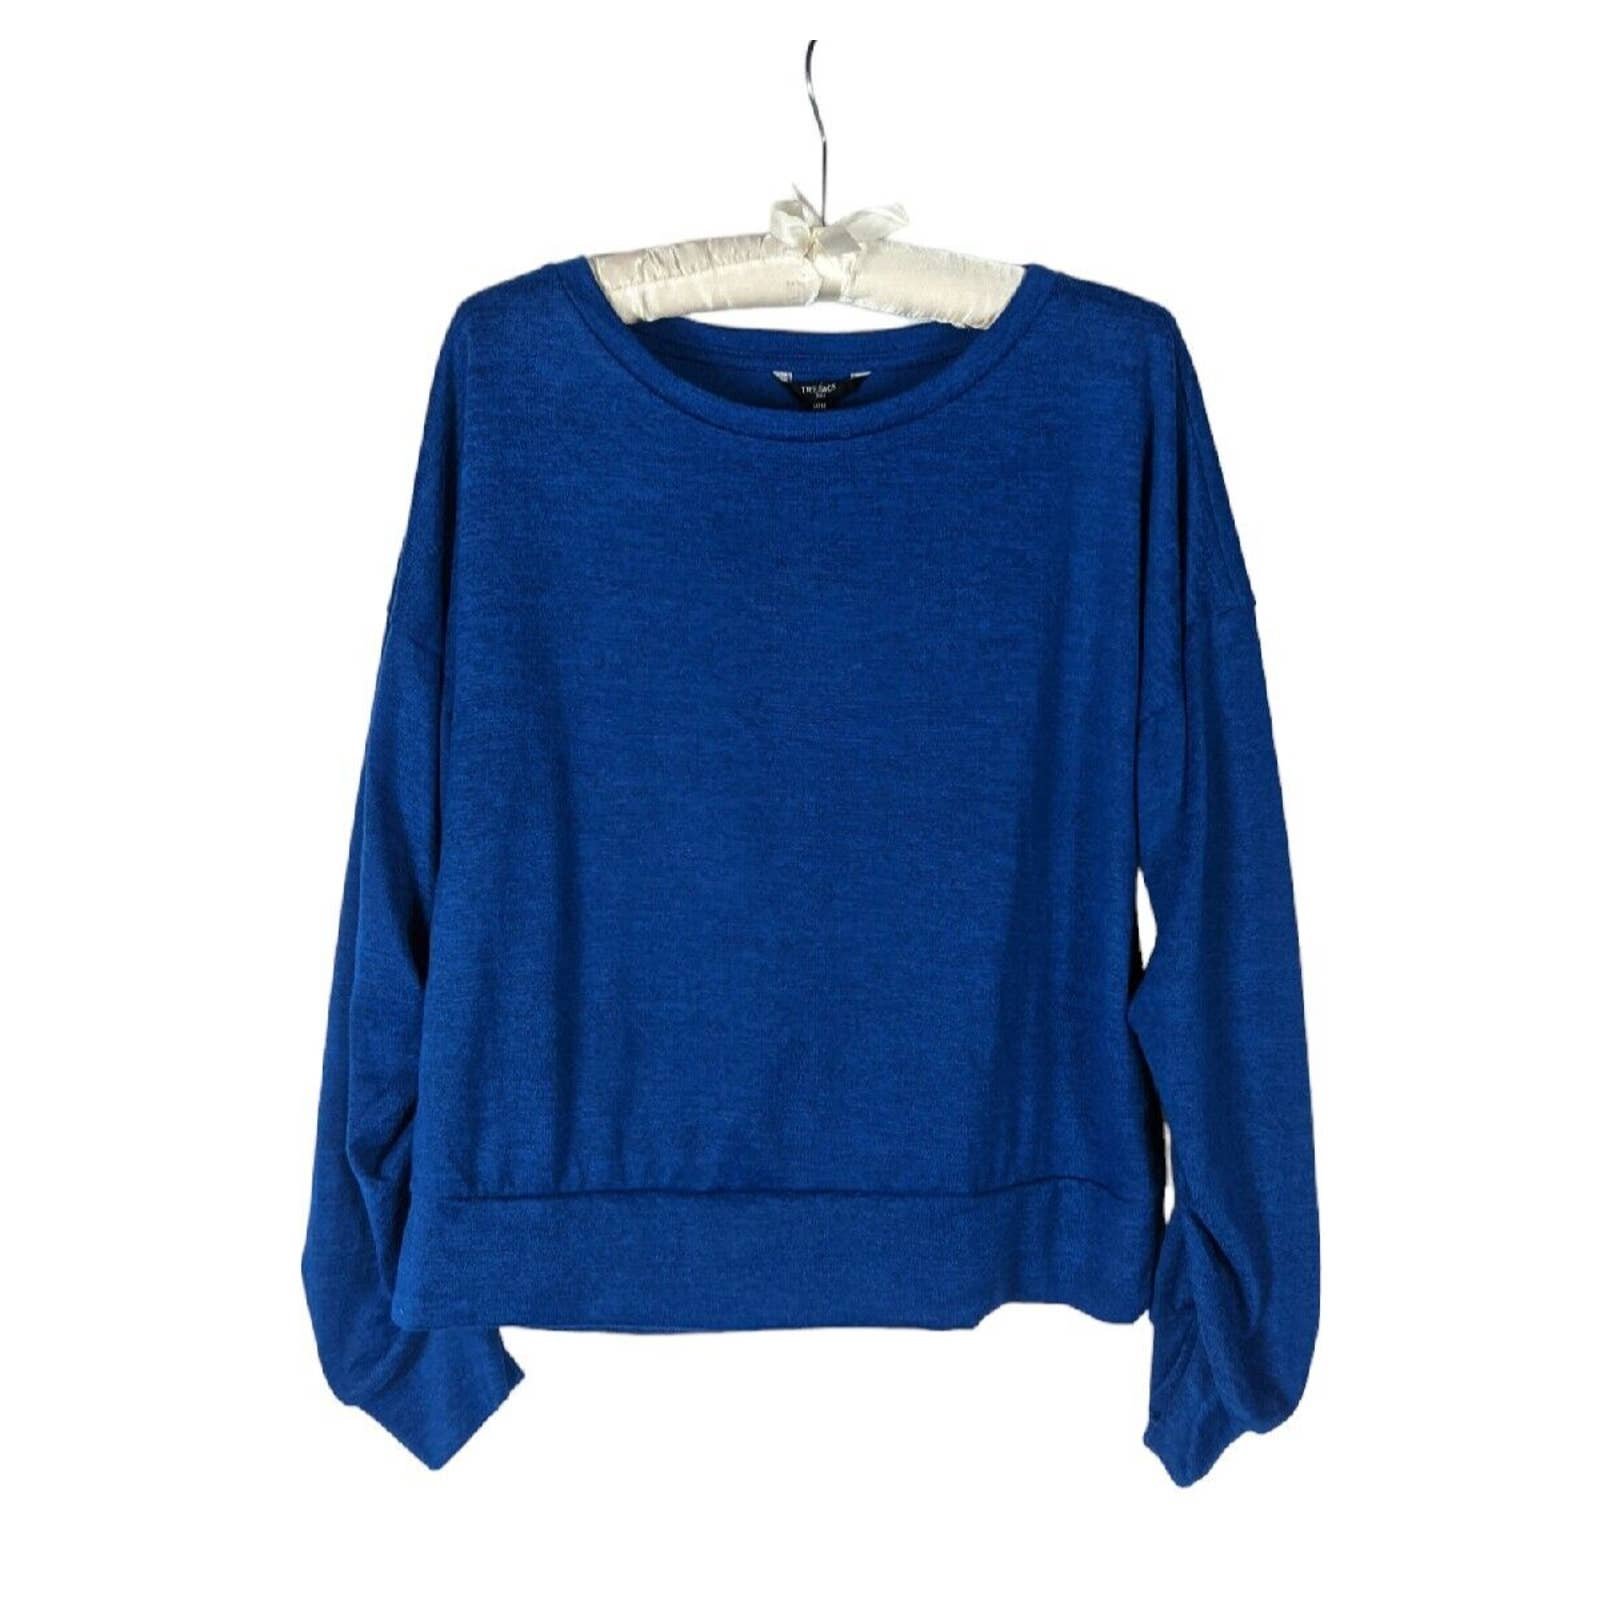 Amazing NWT Tresics Sz M Women´s Blue Ruched Long Sleeve Pullover Sweater ONRLNzx9c no tax